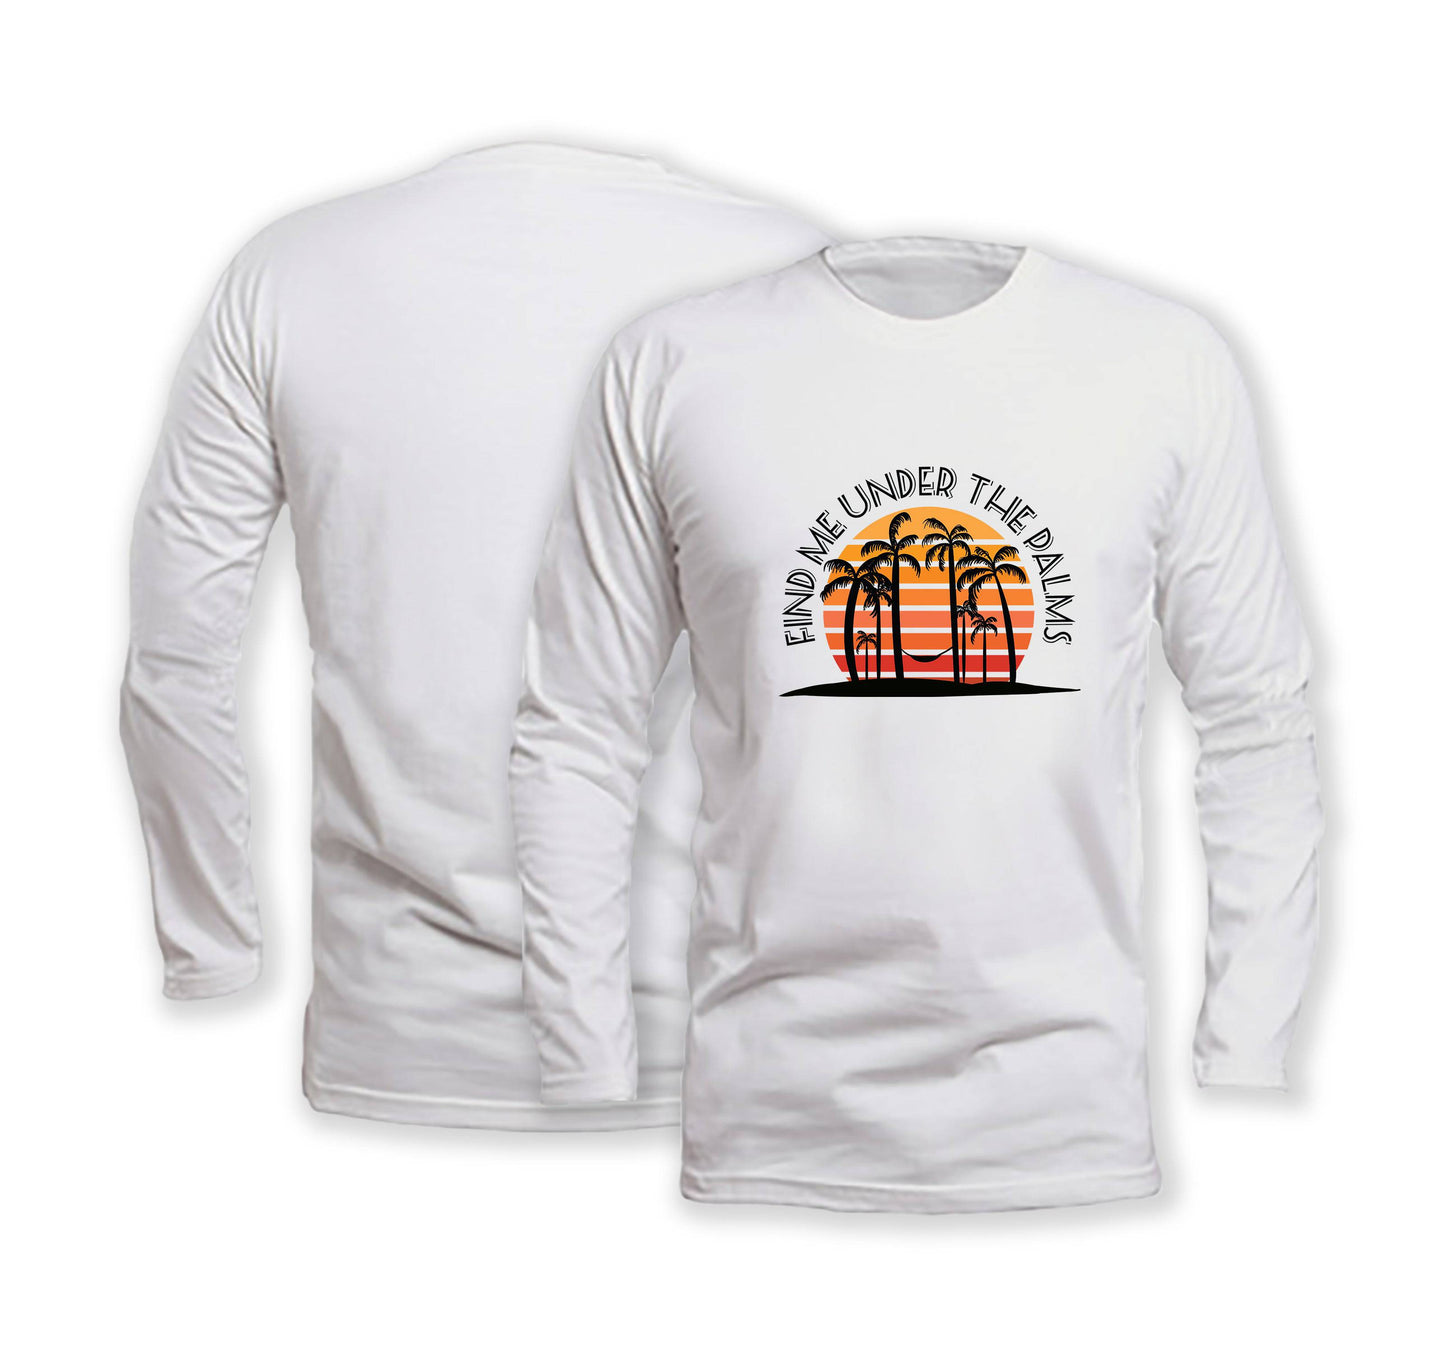 Under The Palms - Long Sleeve Organic Cotton T-Shirt - Front Print - One Choice Apparel